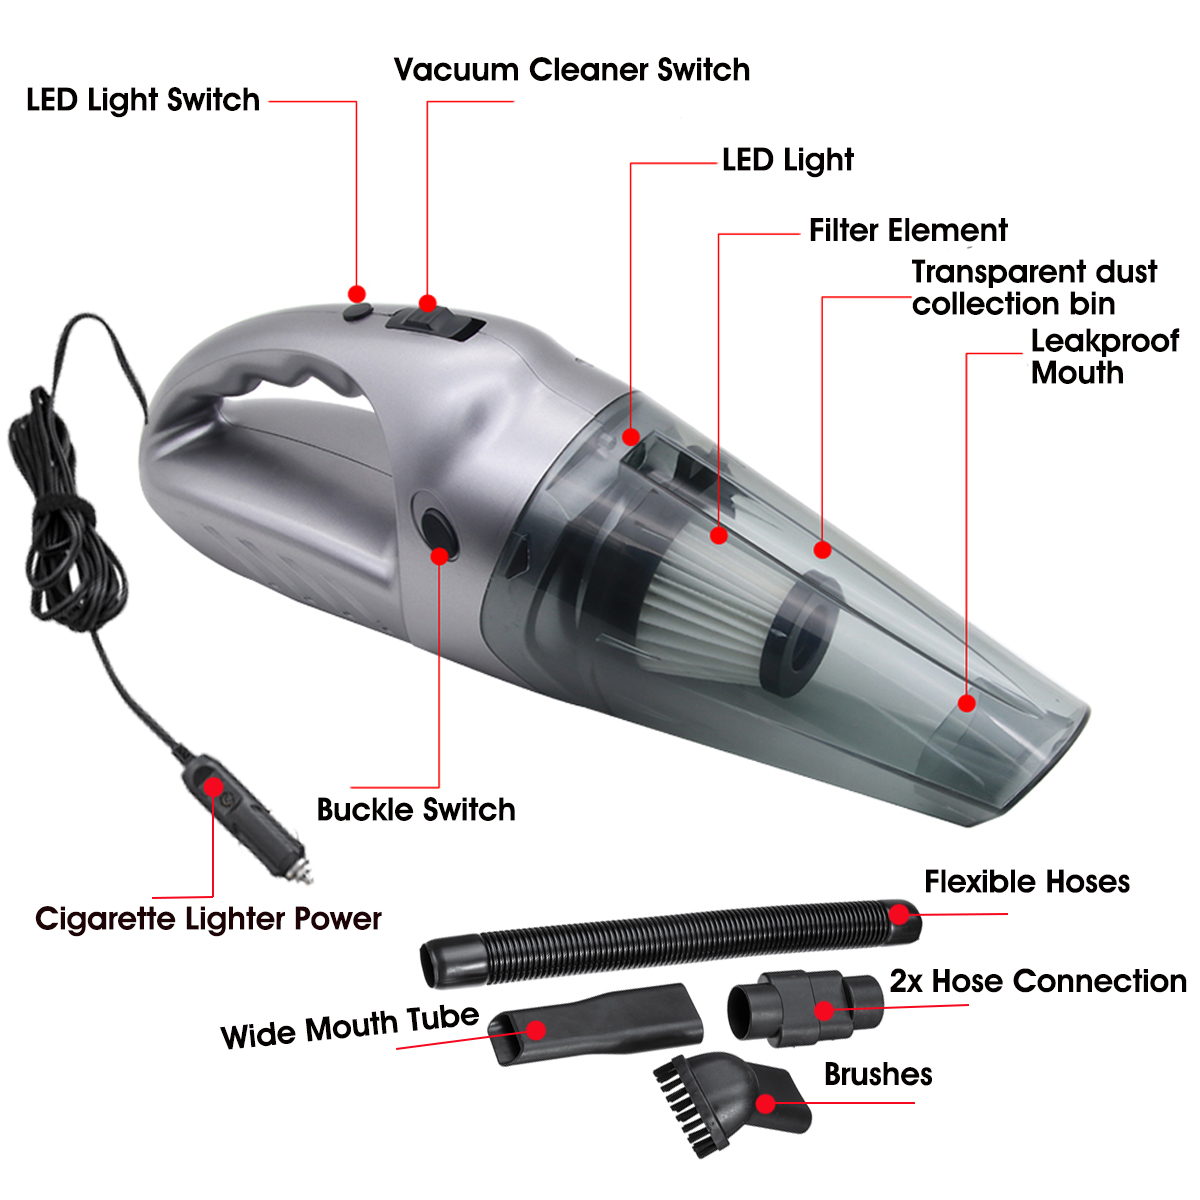 120W-Portable-Auto-Car-Handheld-Vacuum-Cleaner-Duster-Wet--Dry-Dirt-Suction-with-LED-Light-1624459-8